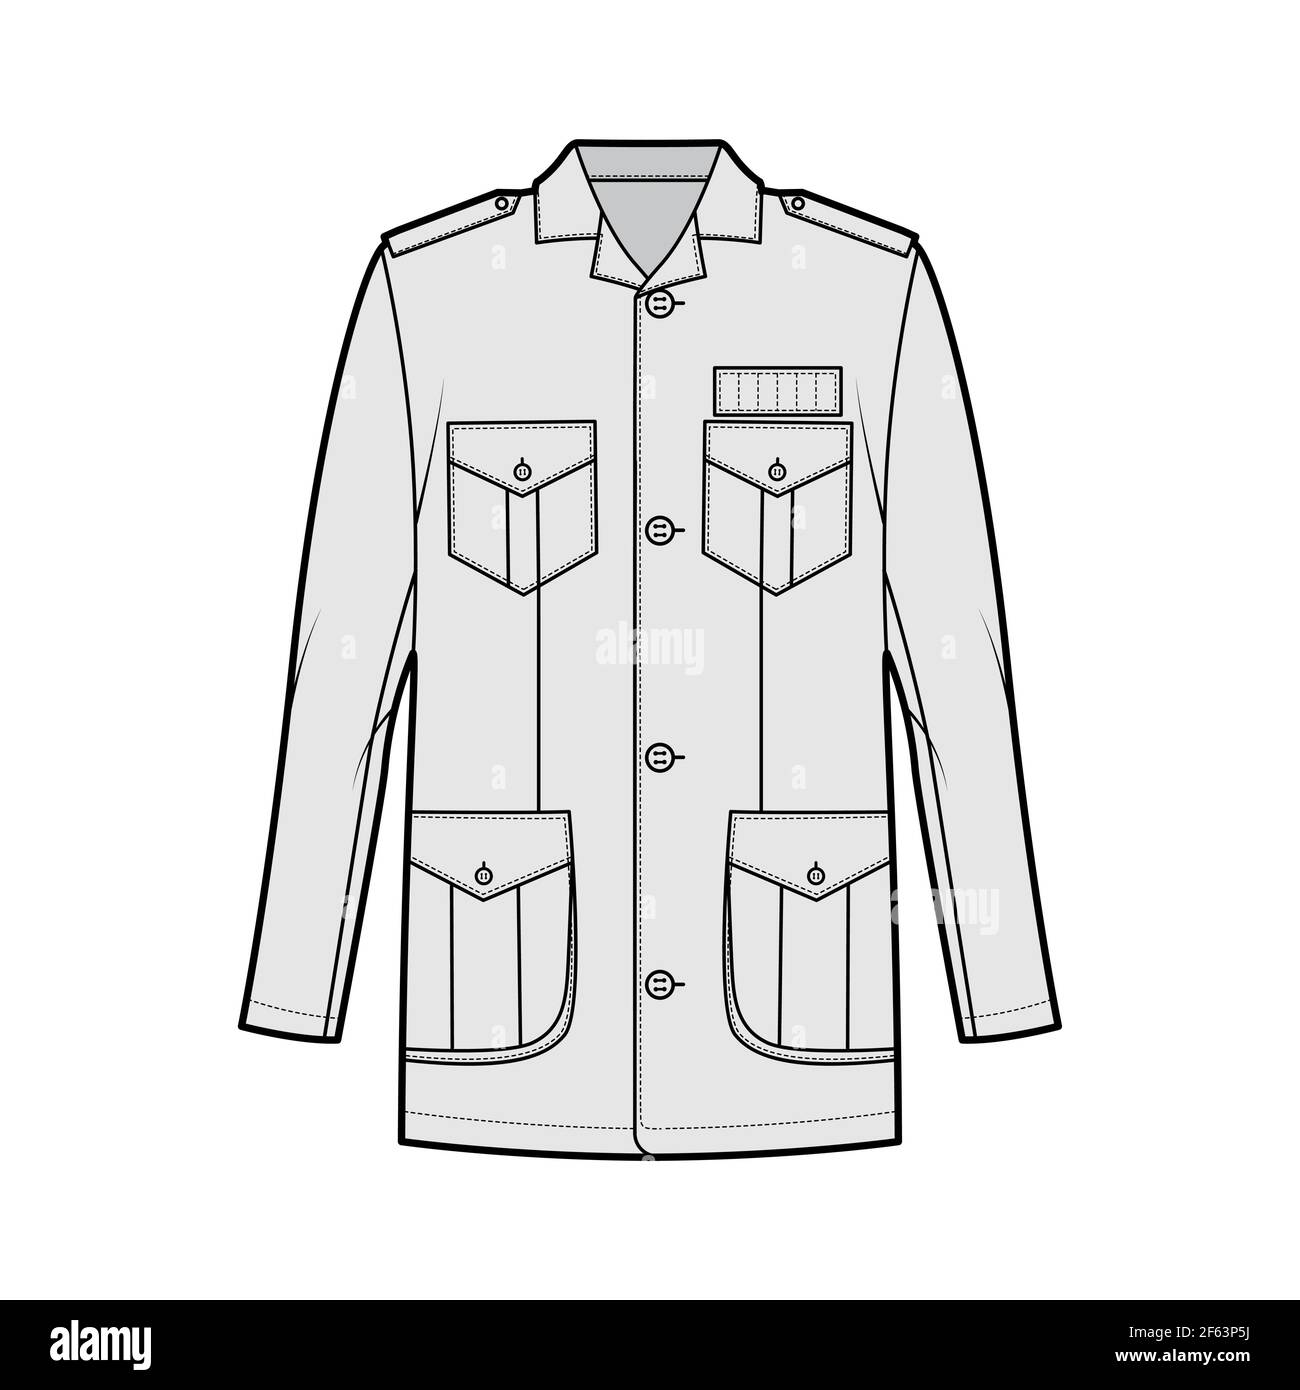 Safari jacket technical fashion illustration with oversized, open collar, long sleeve, pockets, button fastening, epaulettes. Flat coat template front grey color style. Women men unisex top CAD mockup Stock Vector